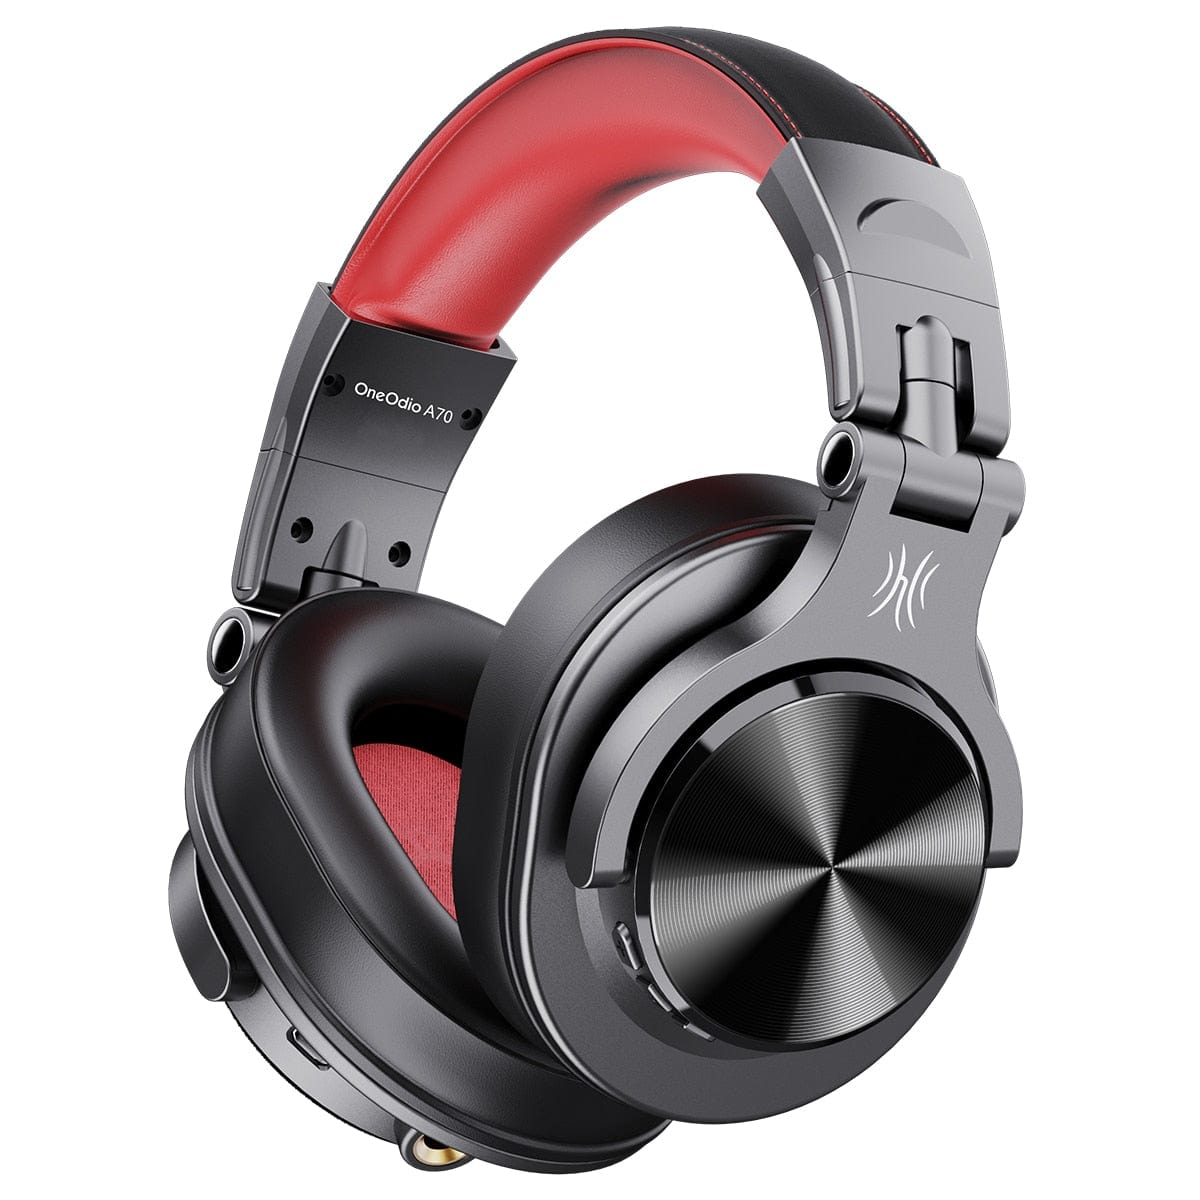 OneOdio OneOdio Wireless Headphone, Version A70, Supports Bluetooth 5.2, Playtime up to 72 Hours, Color Black Red